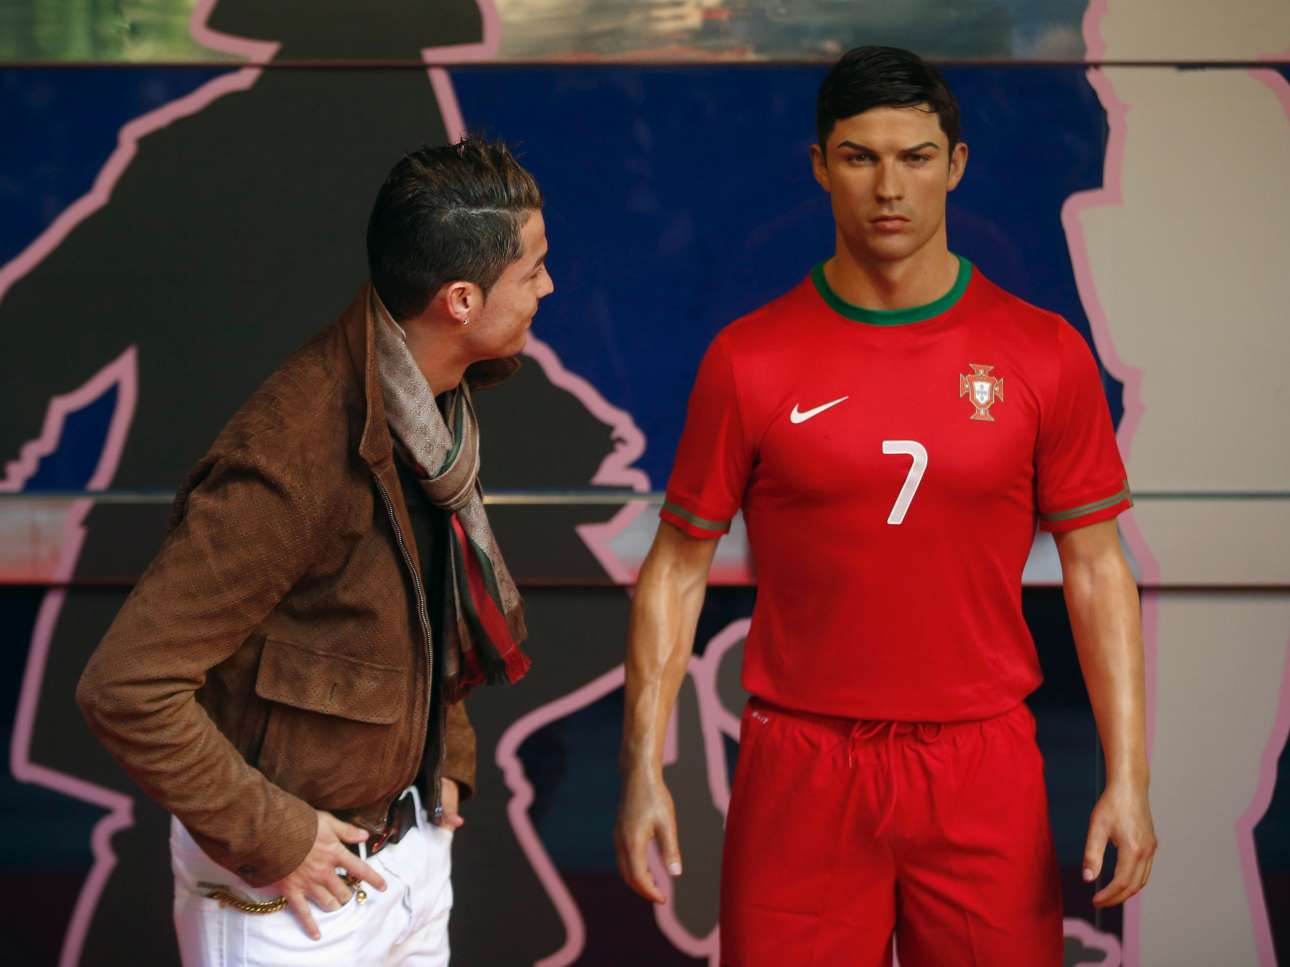 cristiano-ronaldo-liked-his-wax-statue-so-much-he-paid-the-artist-31000-to-make-one-the-footballer-could-keep